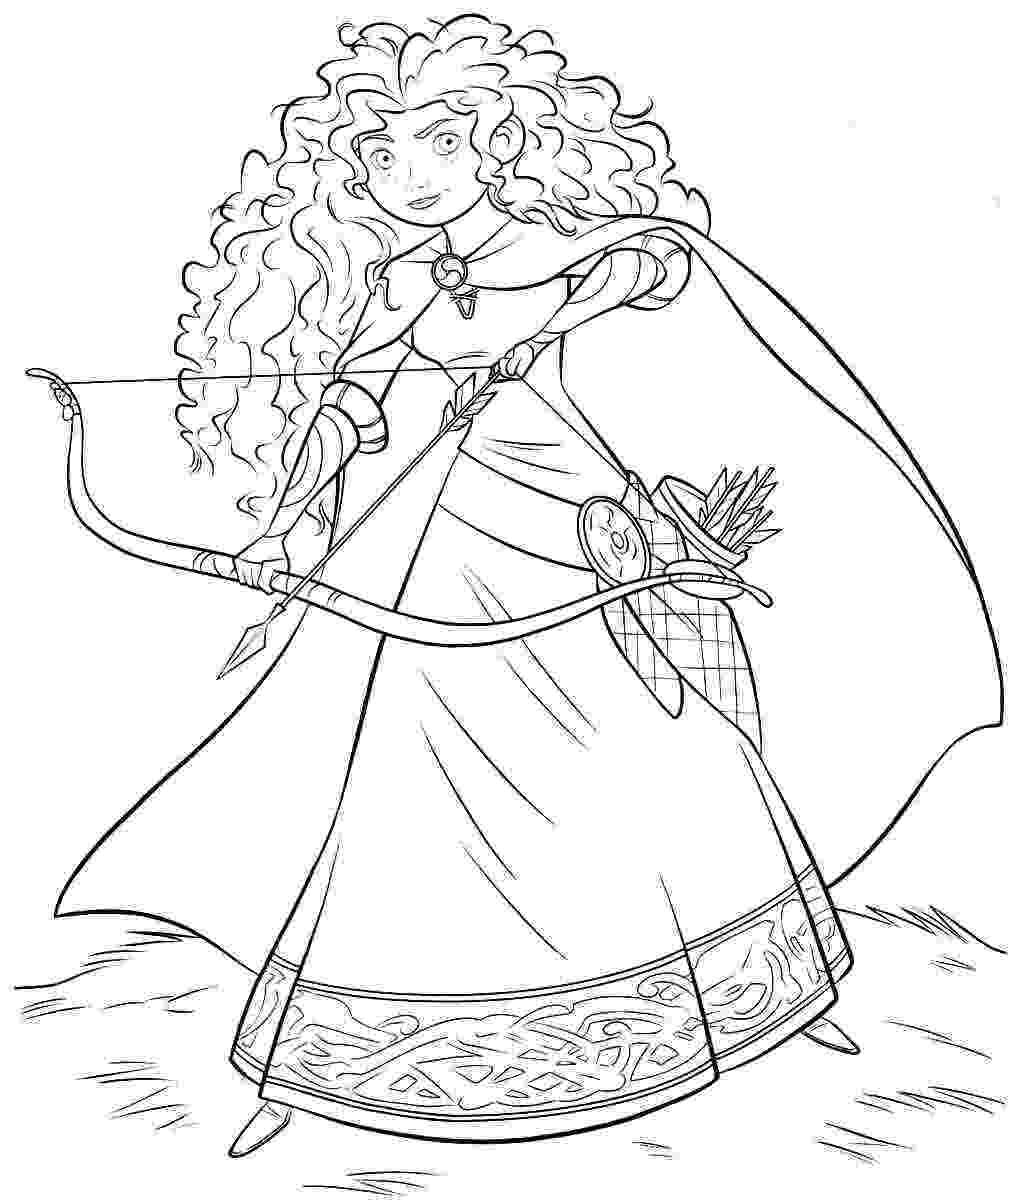 printable coloring pages of princesses baby princess coloring pages to download and print for free pages coloring printable of princesses 